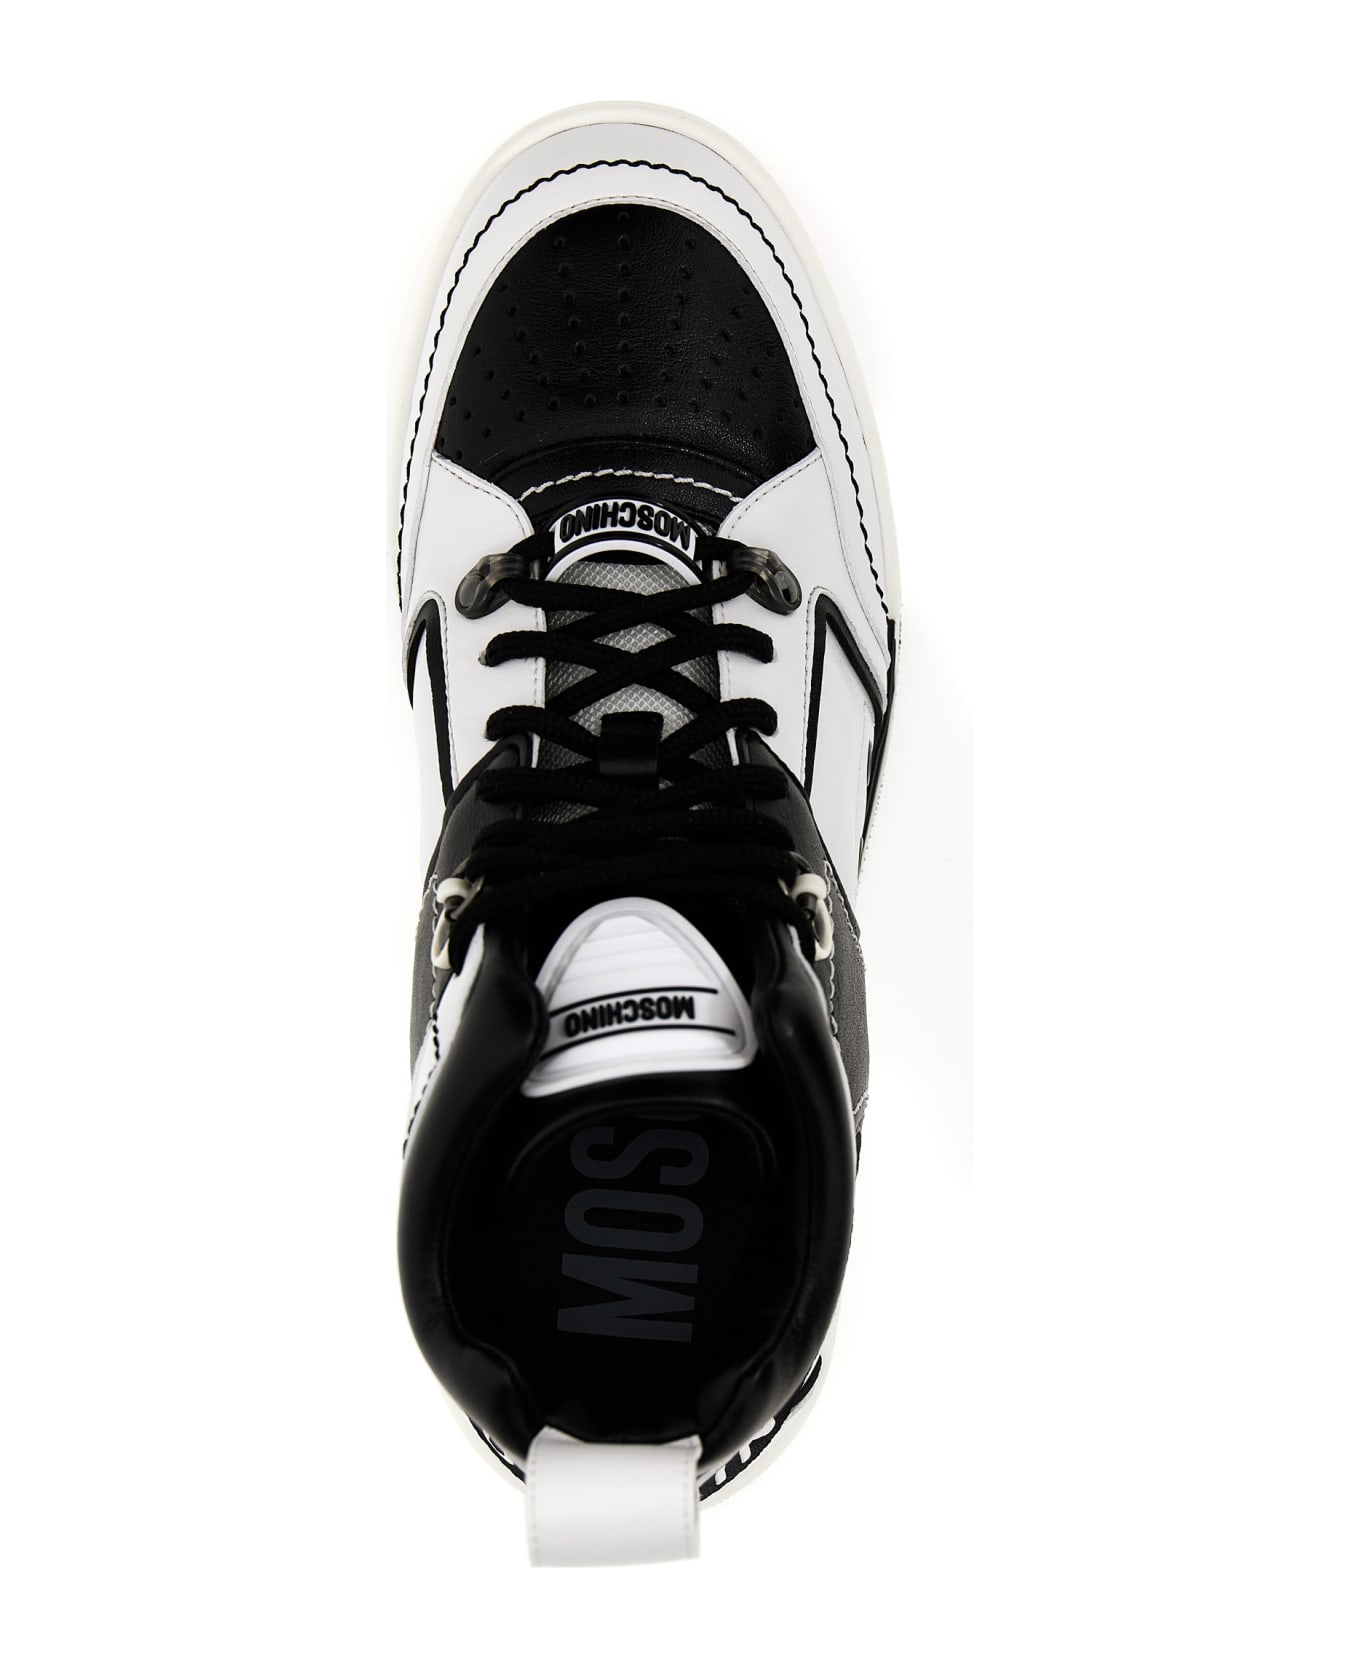 Moschino 'kevin' Sneakers - White/Black